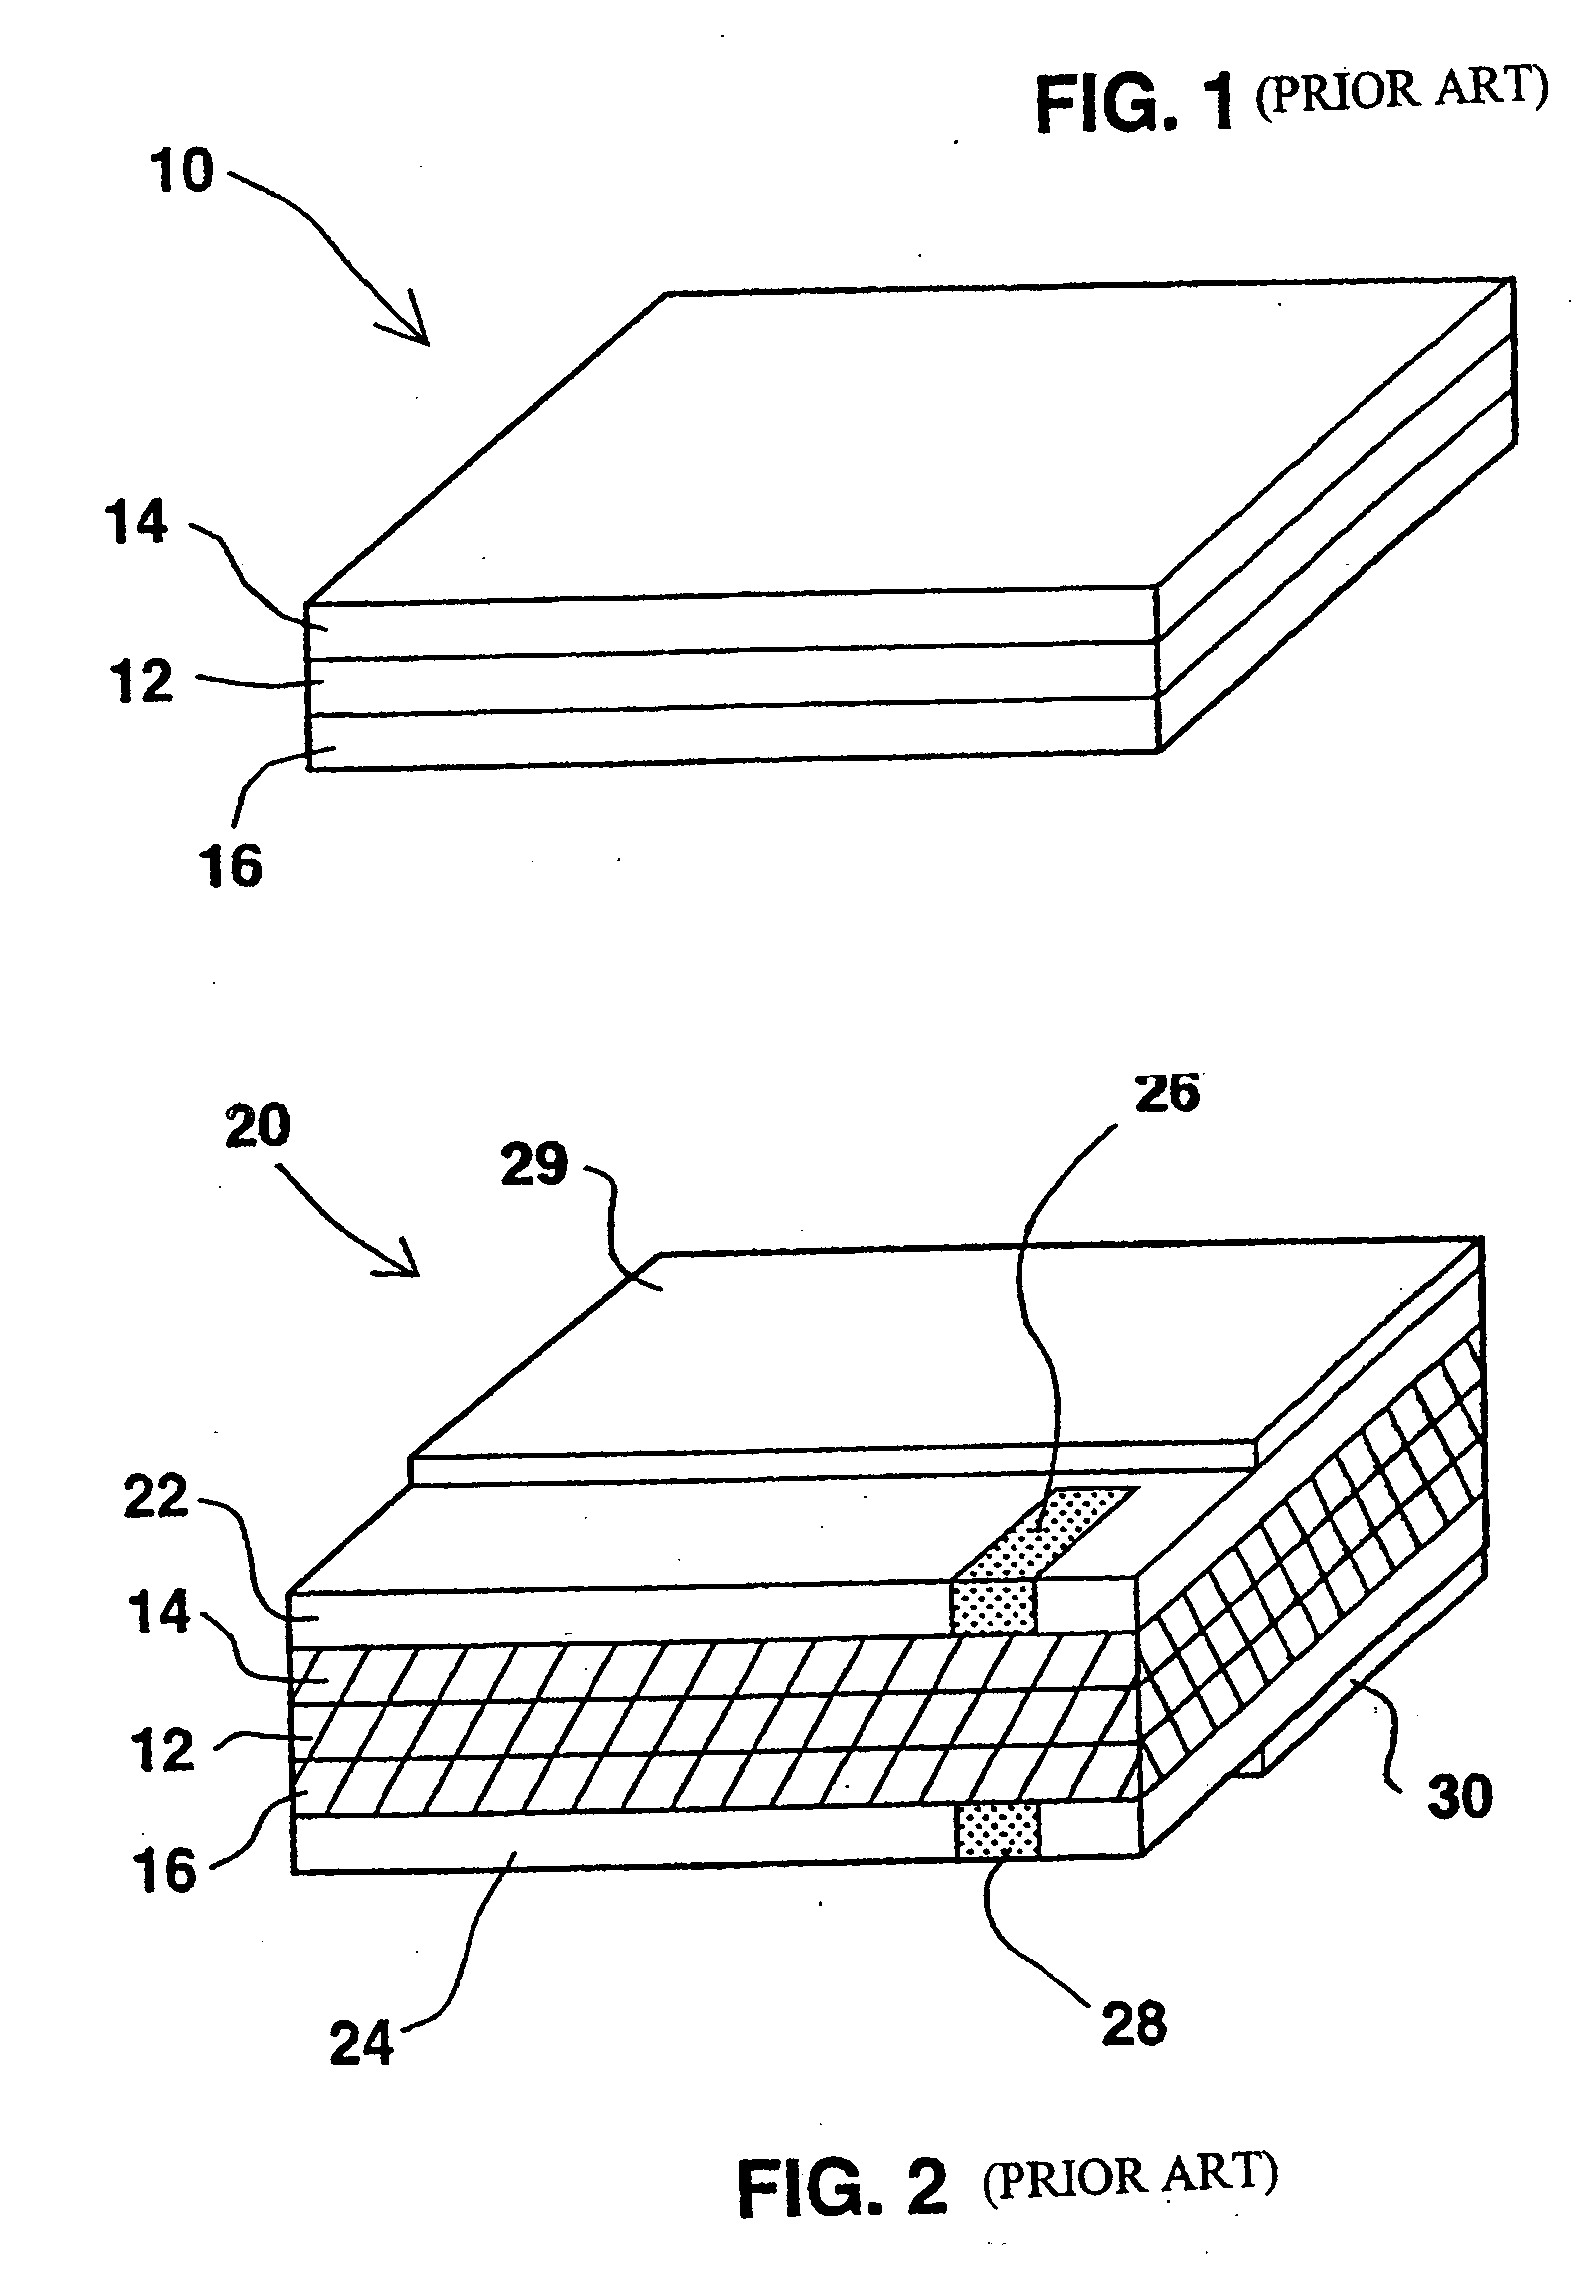 Functionally improved battery and method of making same